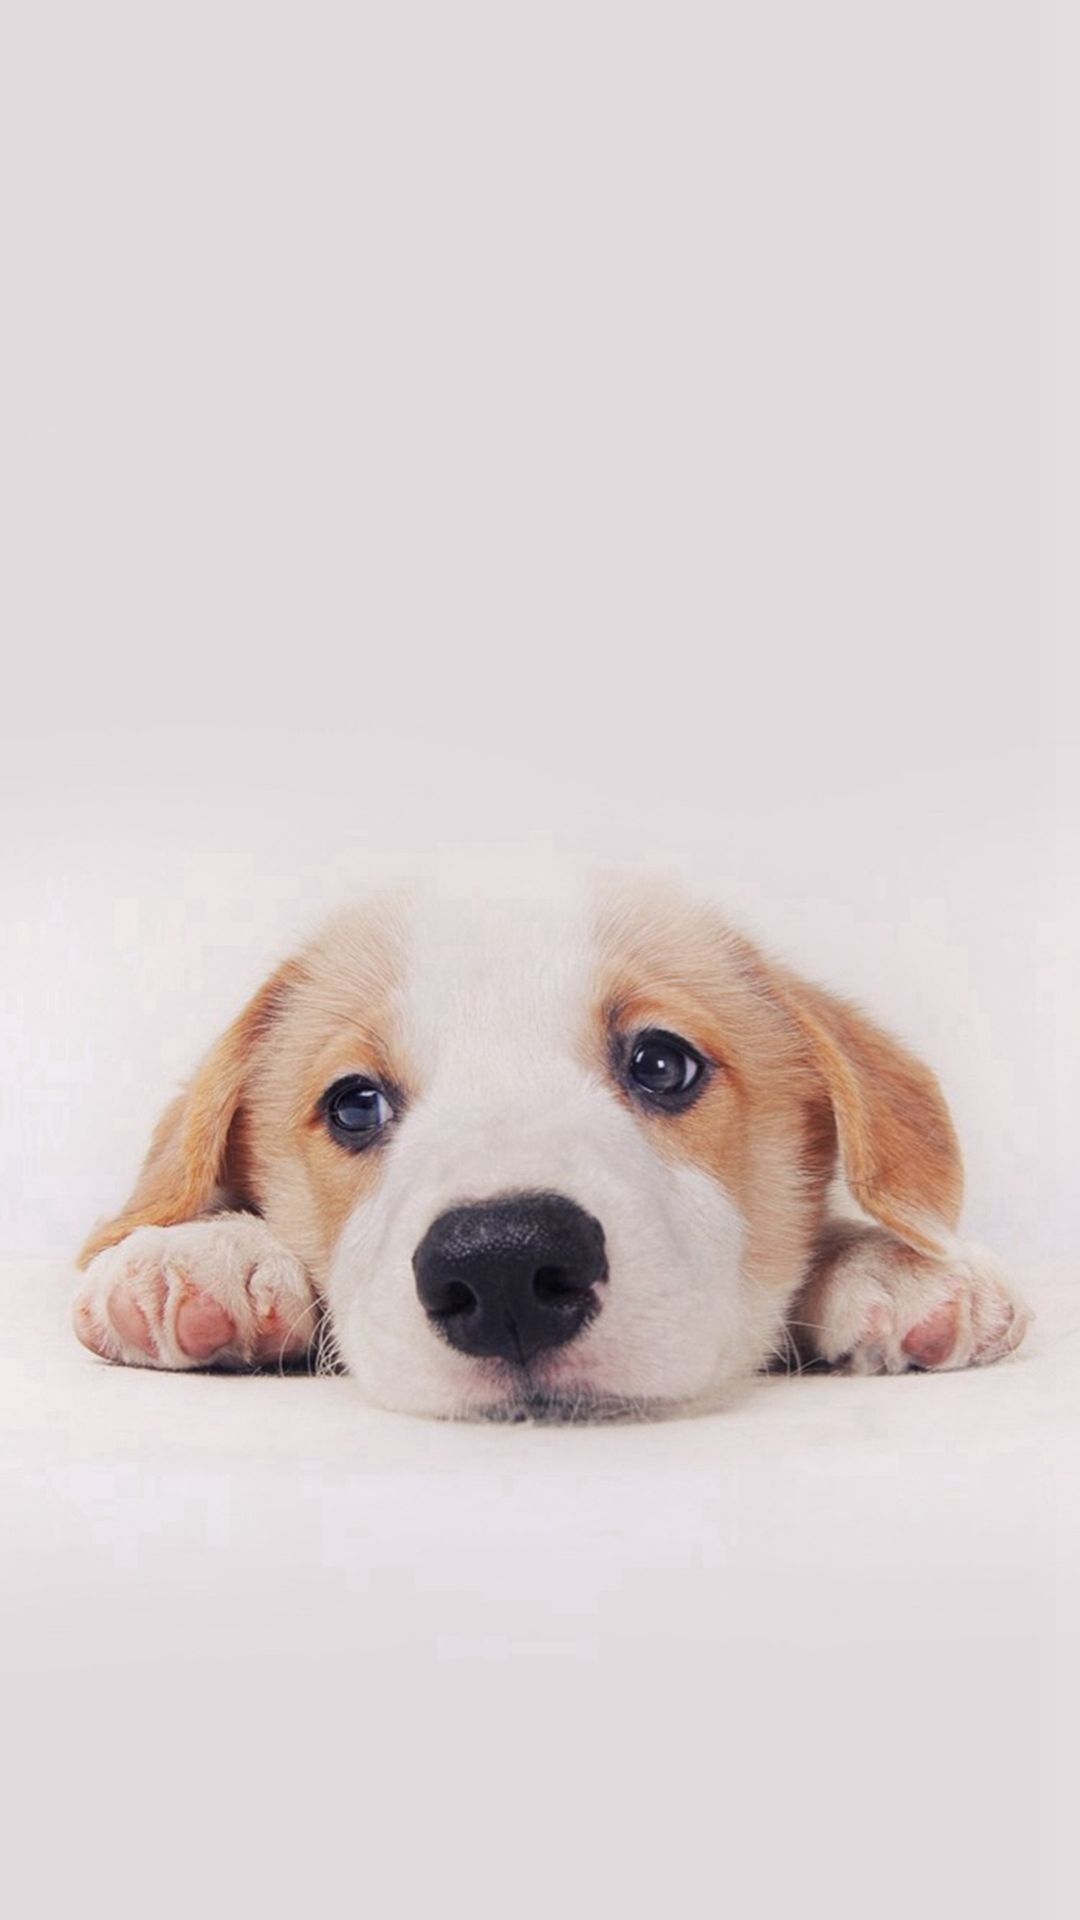 Cute dog phone wallpapers, Adorable backgrounds, Lovely pet, Picture-perfect, 1080x1920 Full HD Phone